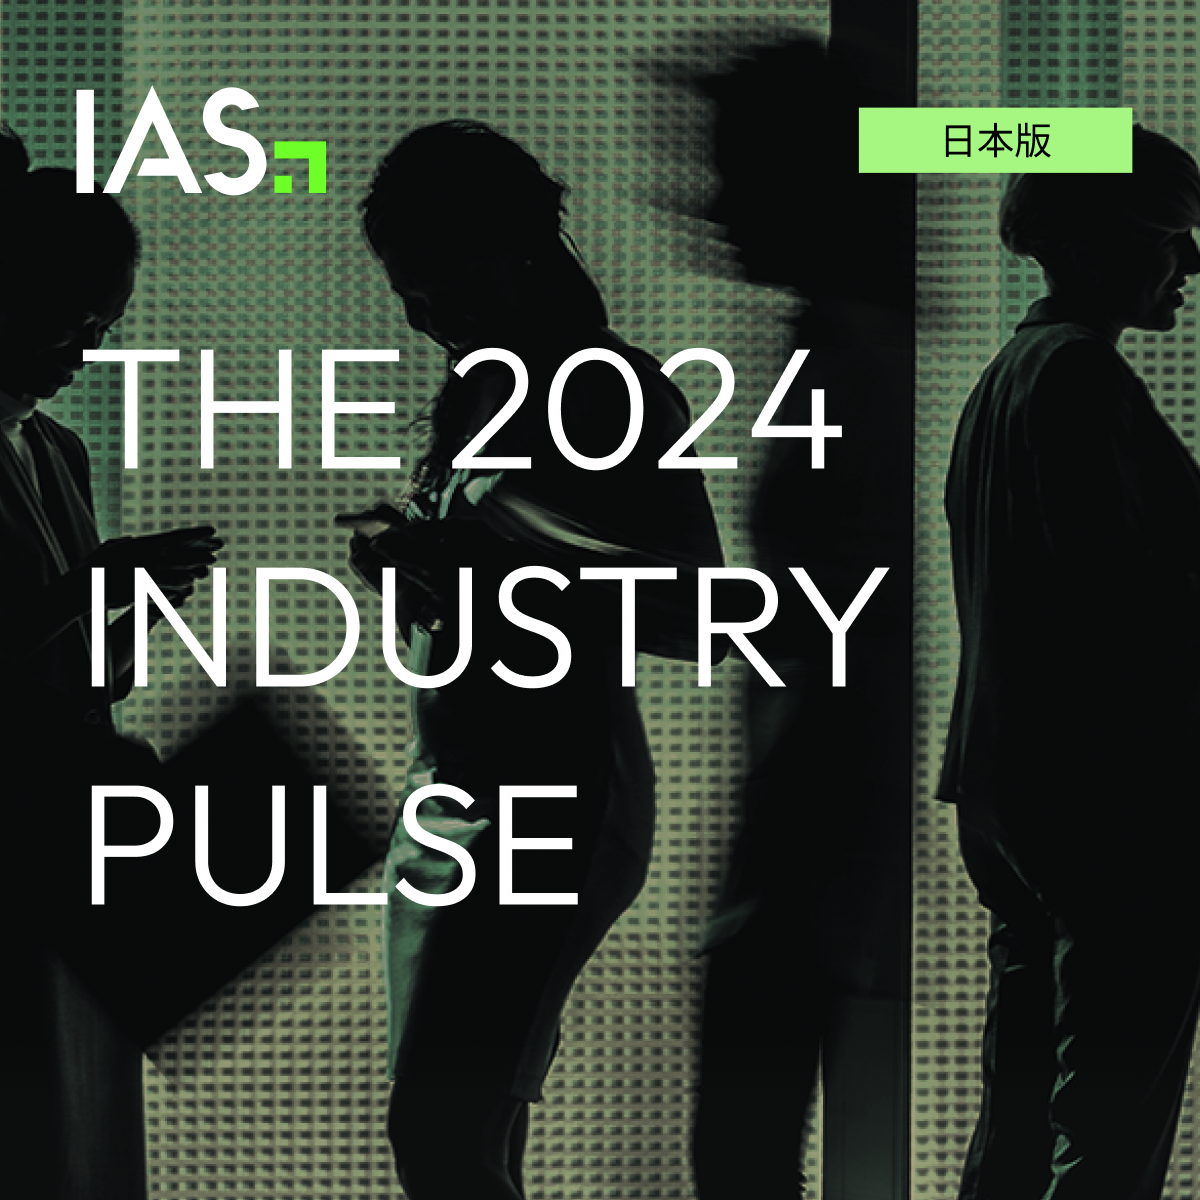 THE 2024 INDUSTRY PULSE